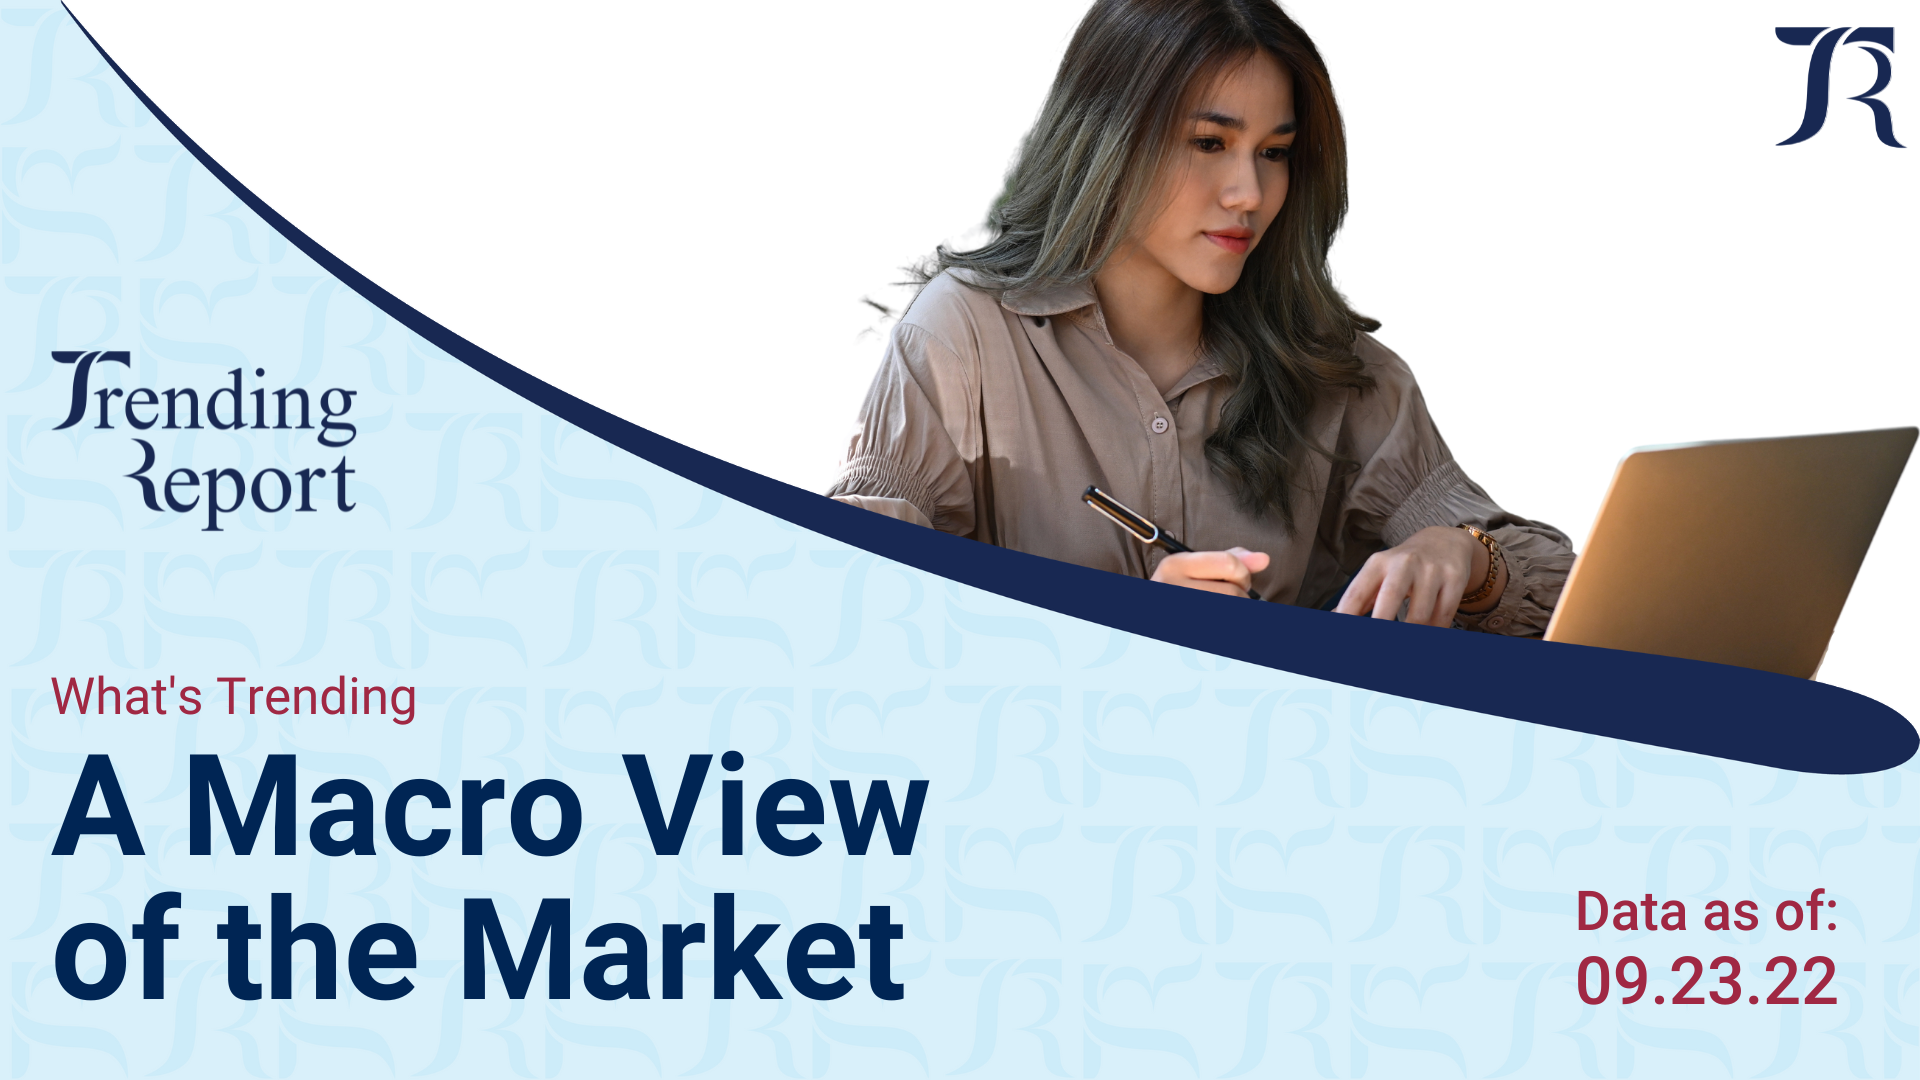 What's Trending: A Macro View of the Market